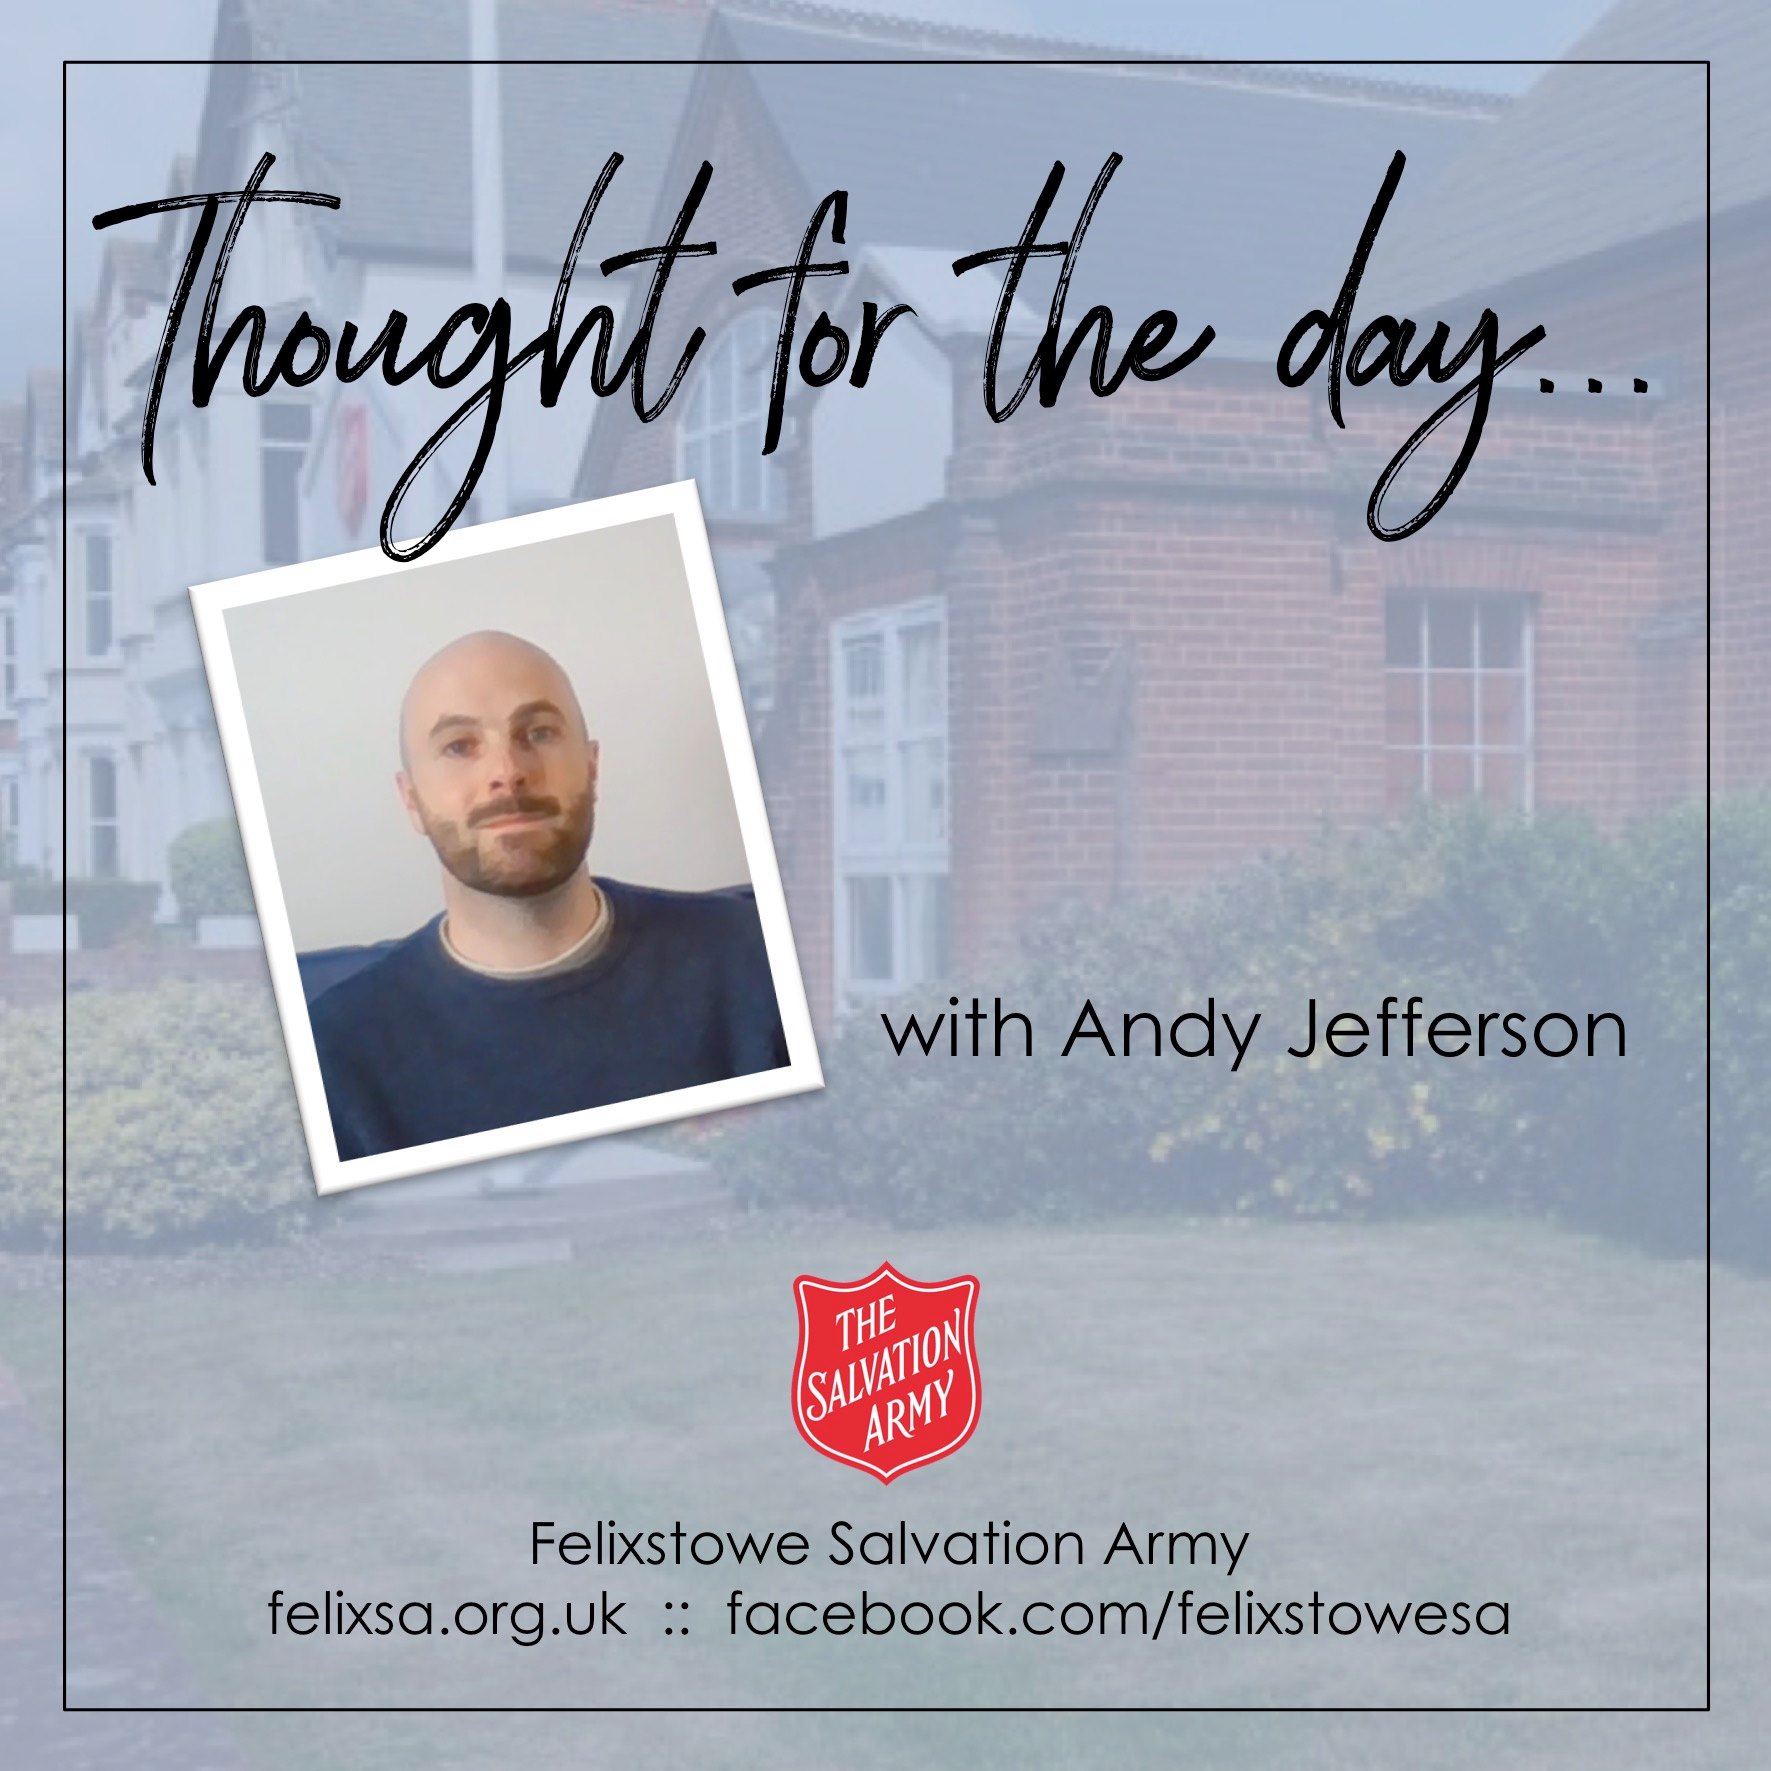 Thought for the Day with Andy Jefferson